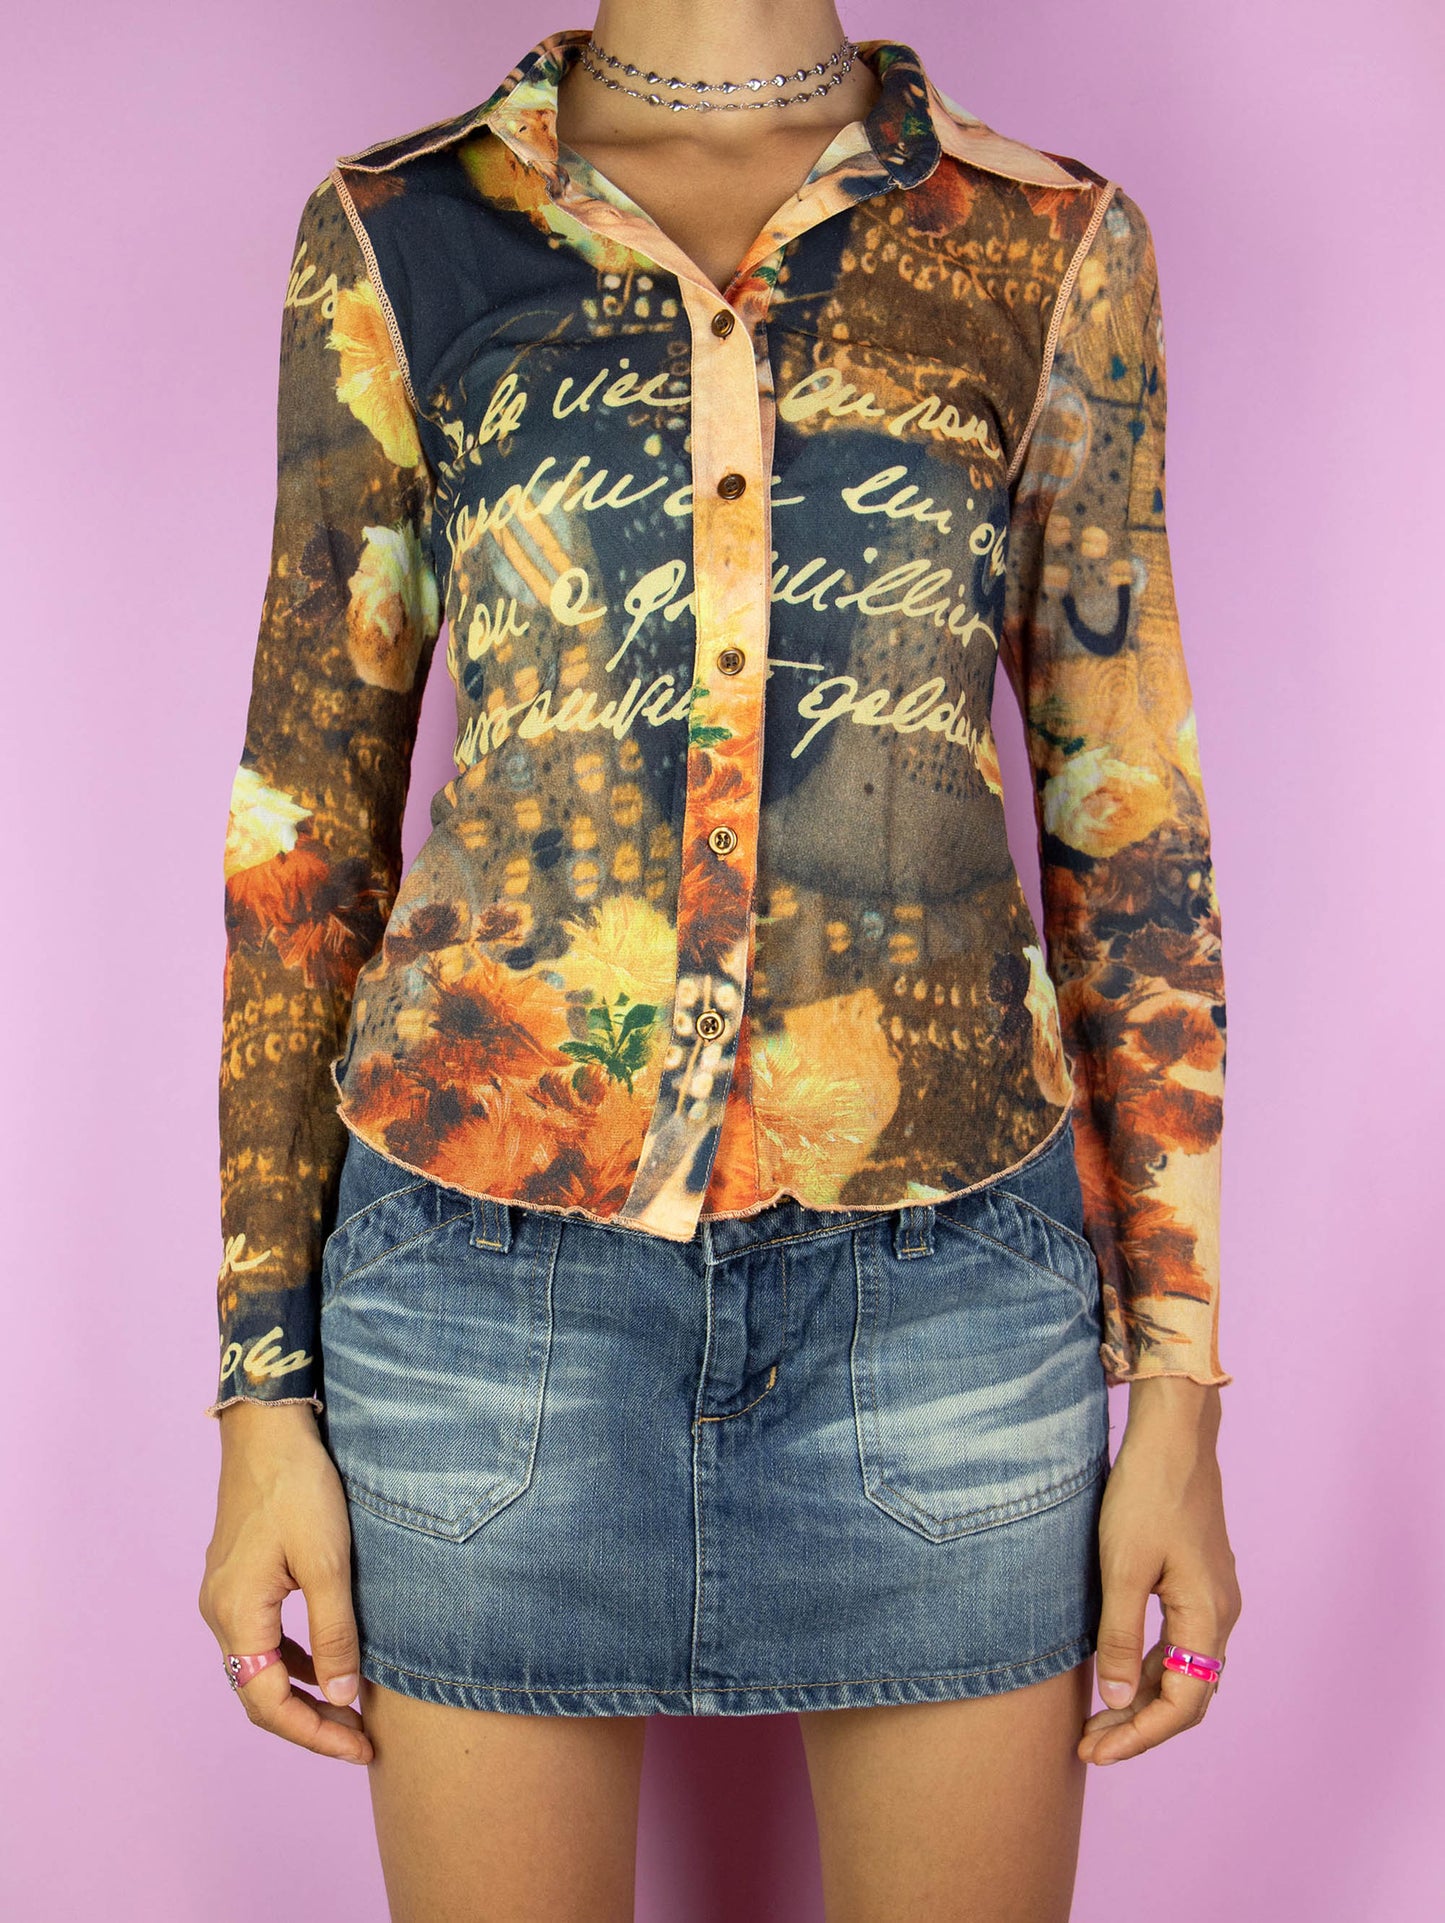 The Y2K Painting Printed Mesh Shirt is a vintage 2000s renaissance abstract graphic semi-sheer blouse with a collar and buttons.